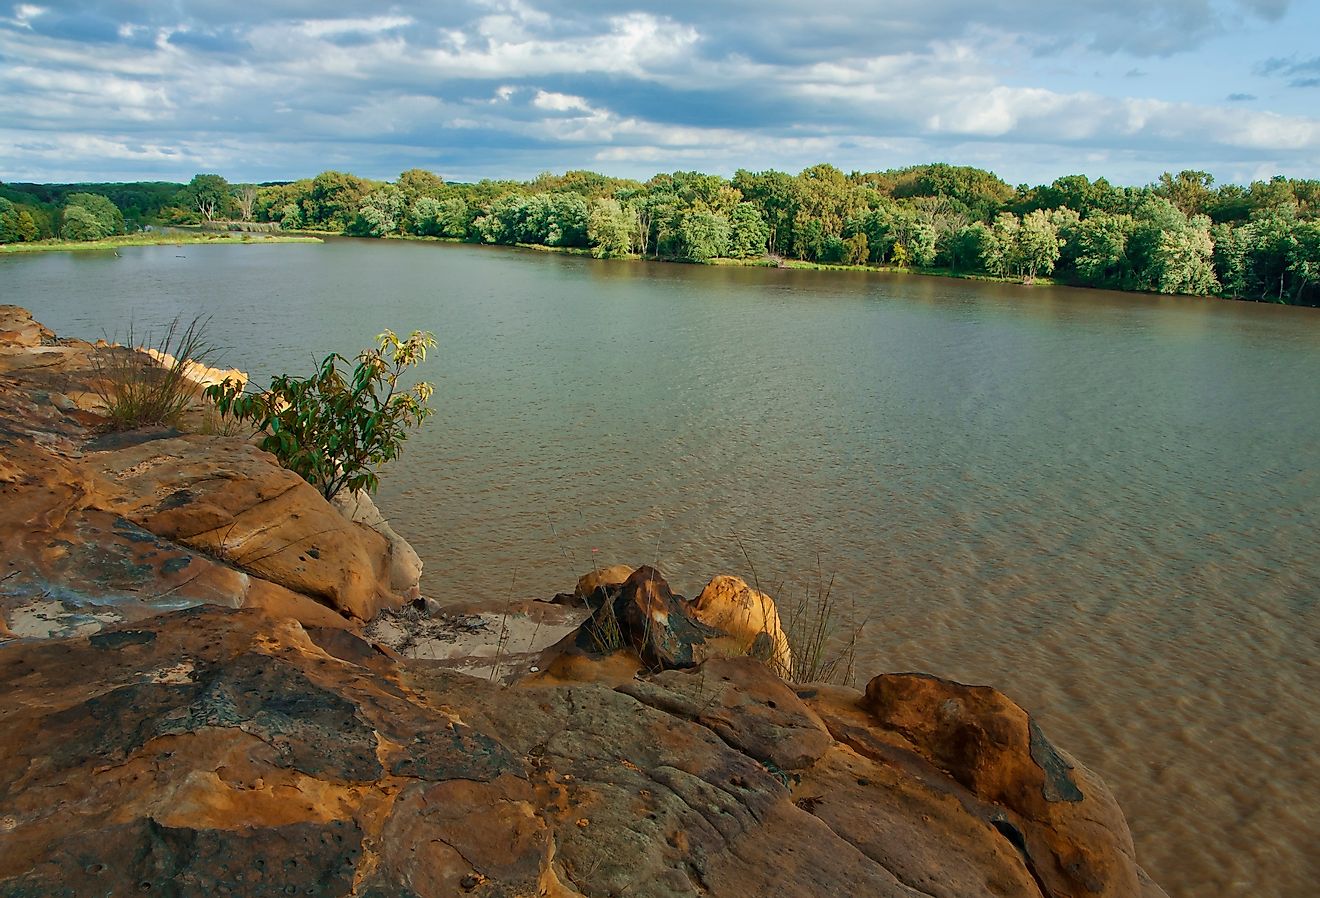 View from a rock of the Illinois River on a summer evening. Image credit Hank Erdmann via AdobeStock.